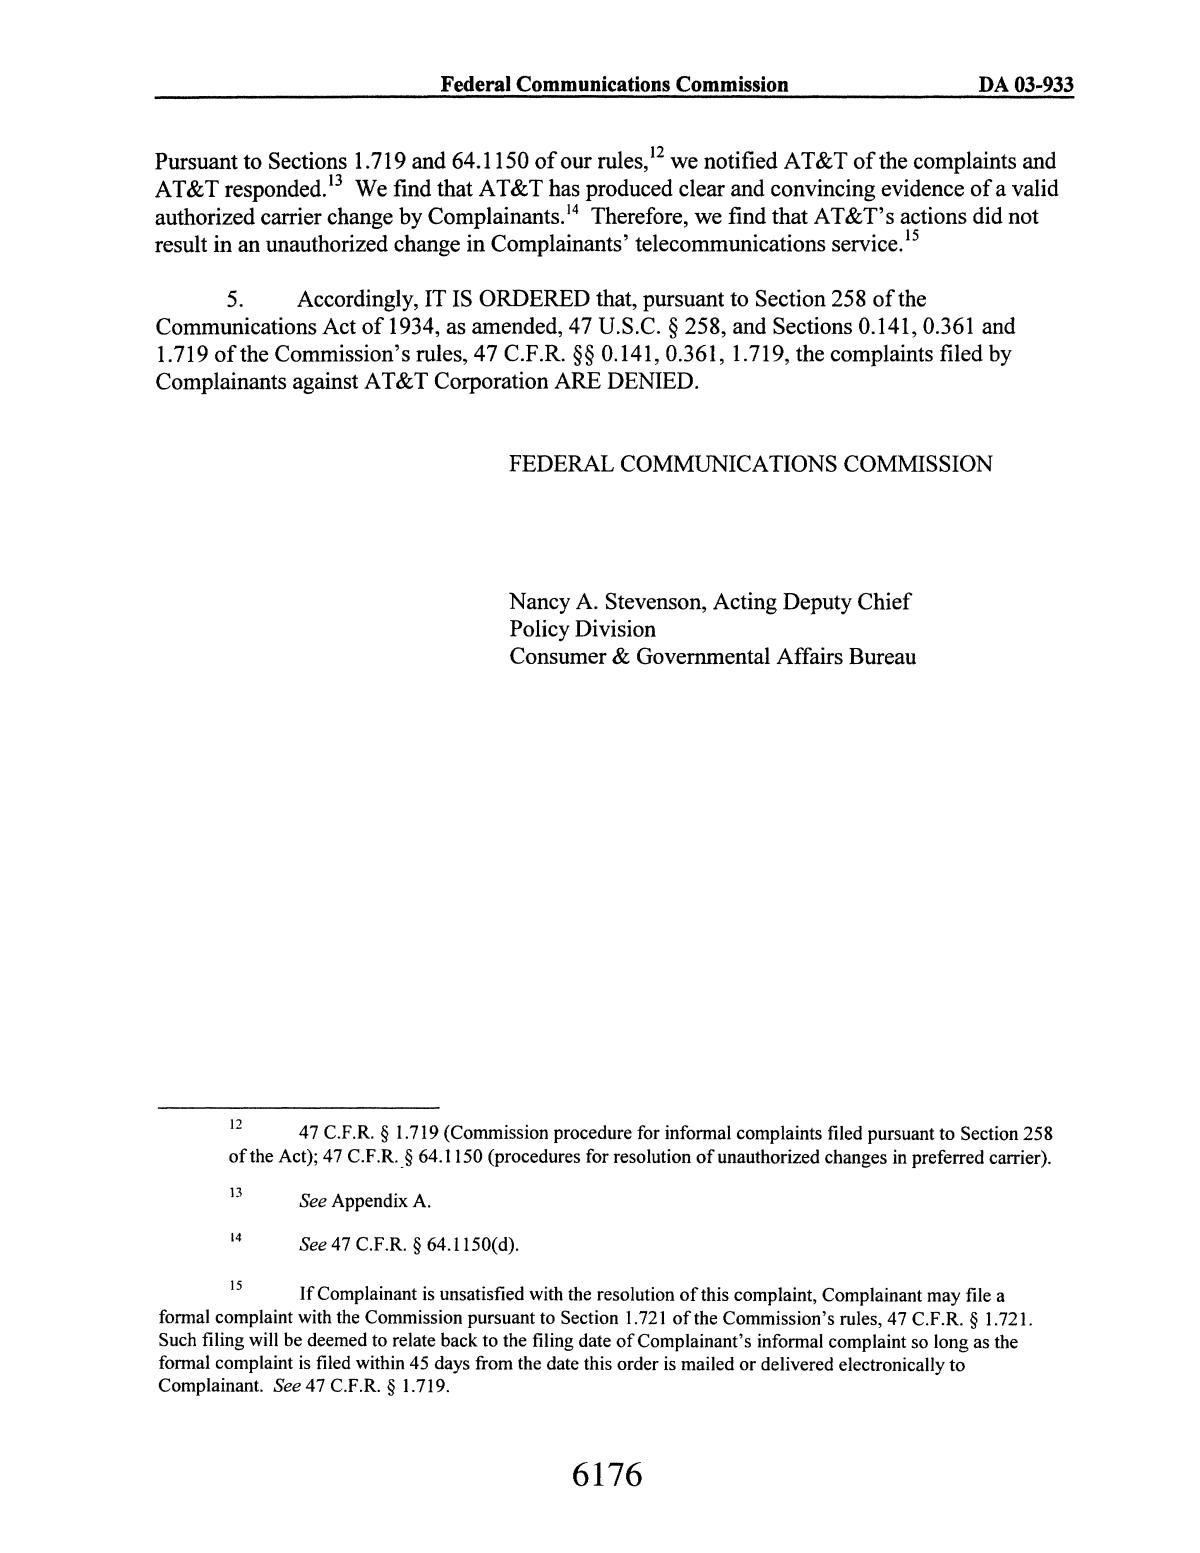 FCC Record, Volume 18, No. 10, Pages 6134 to 6998, March 31 - April 11, 2003
                                                
                                                    6176
                                                